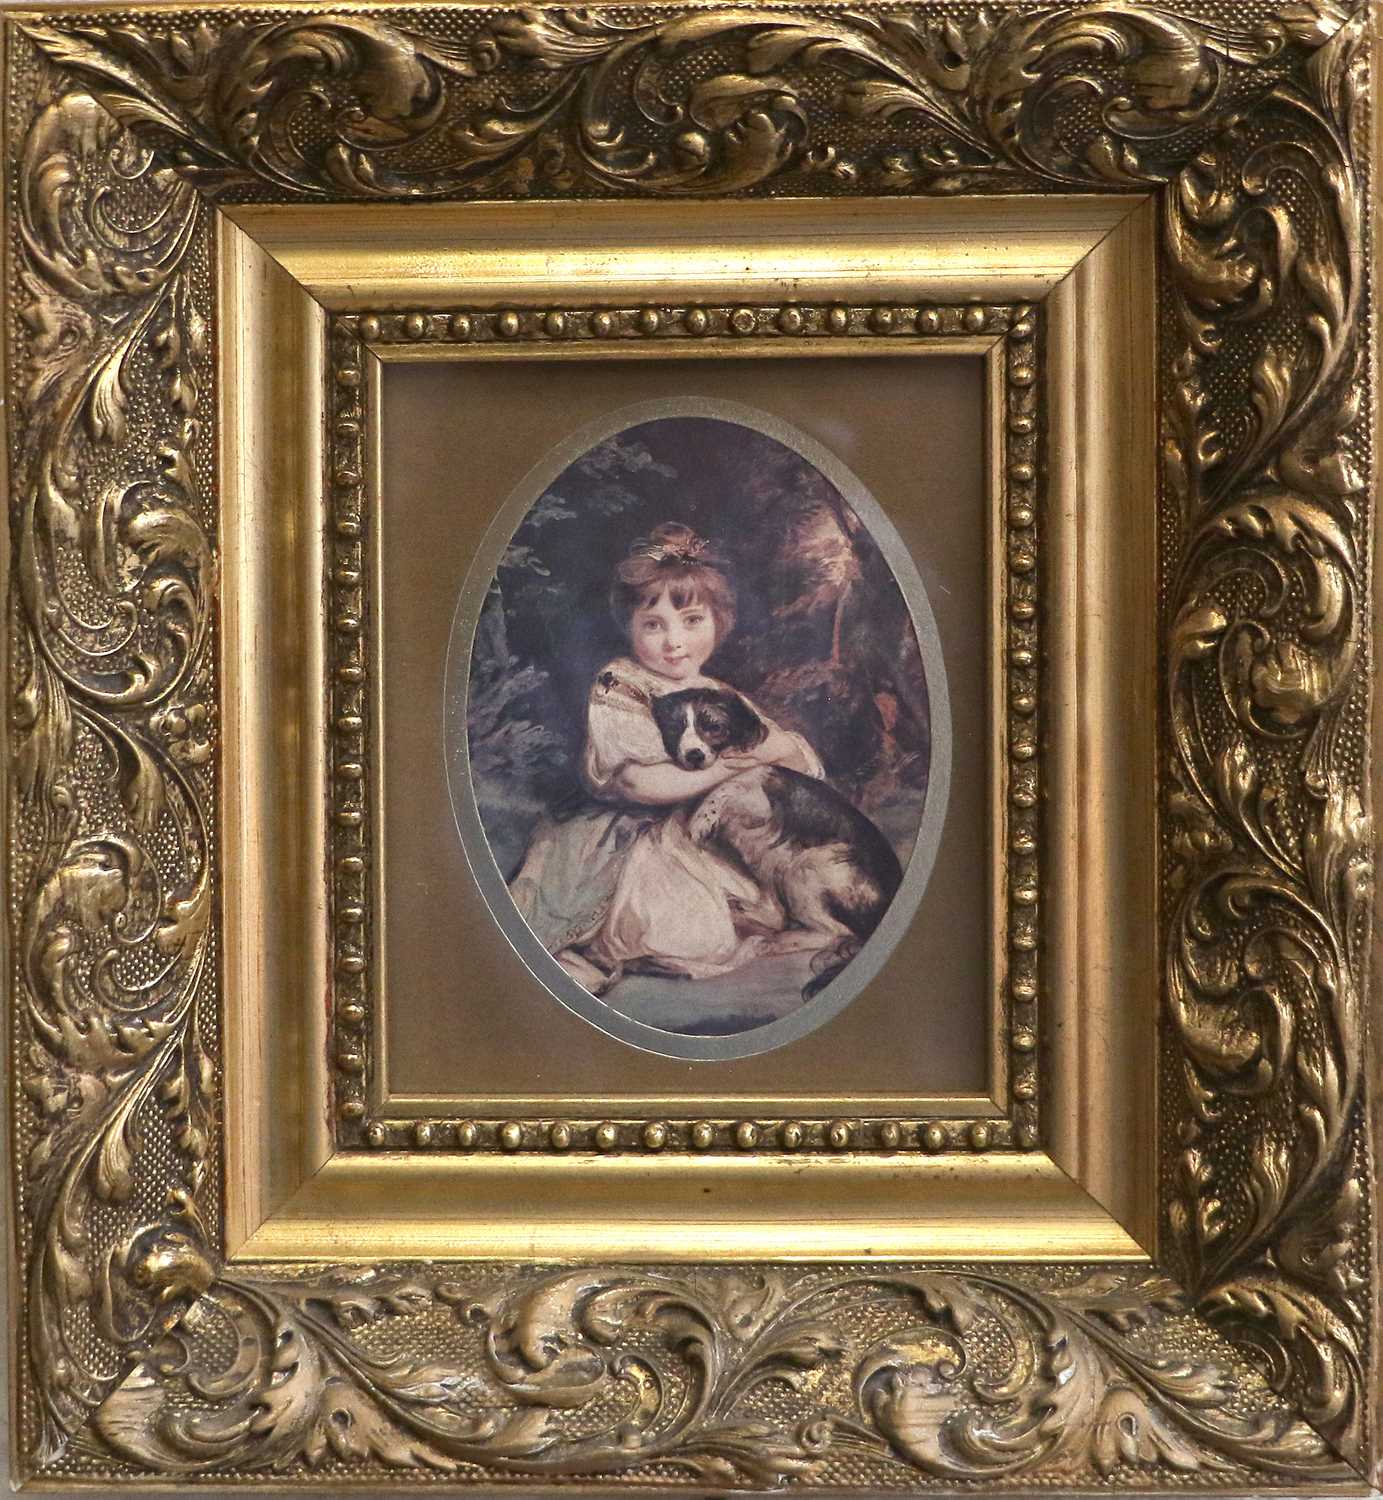 A Modern Reproduction After an Italian Original, together with a pair of small portrait prints of - Image 12 of 12